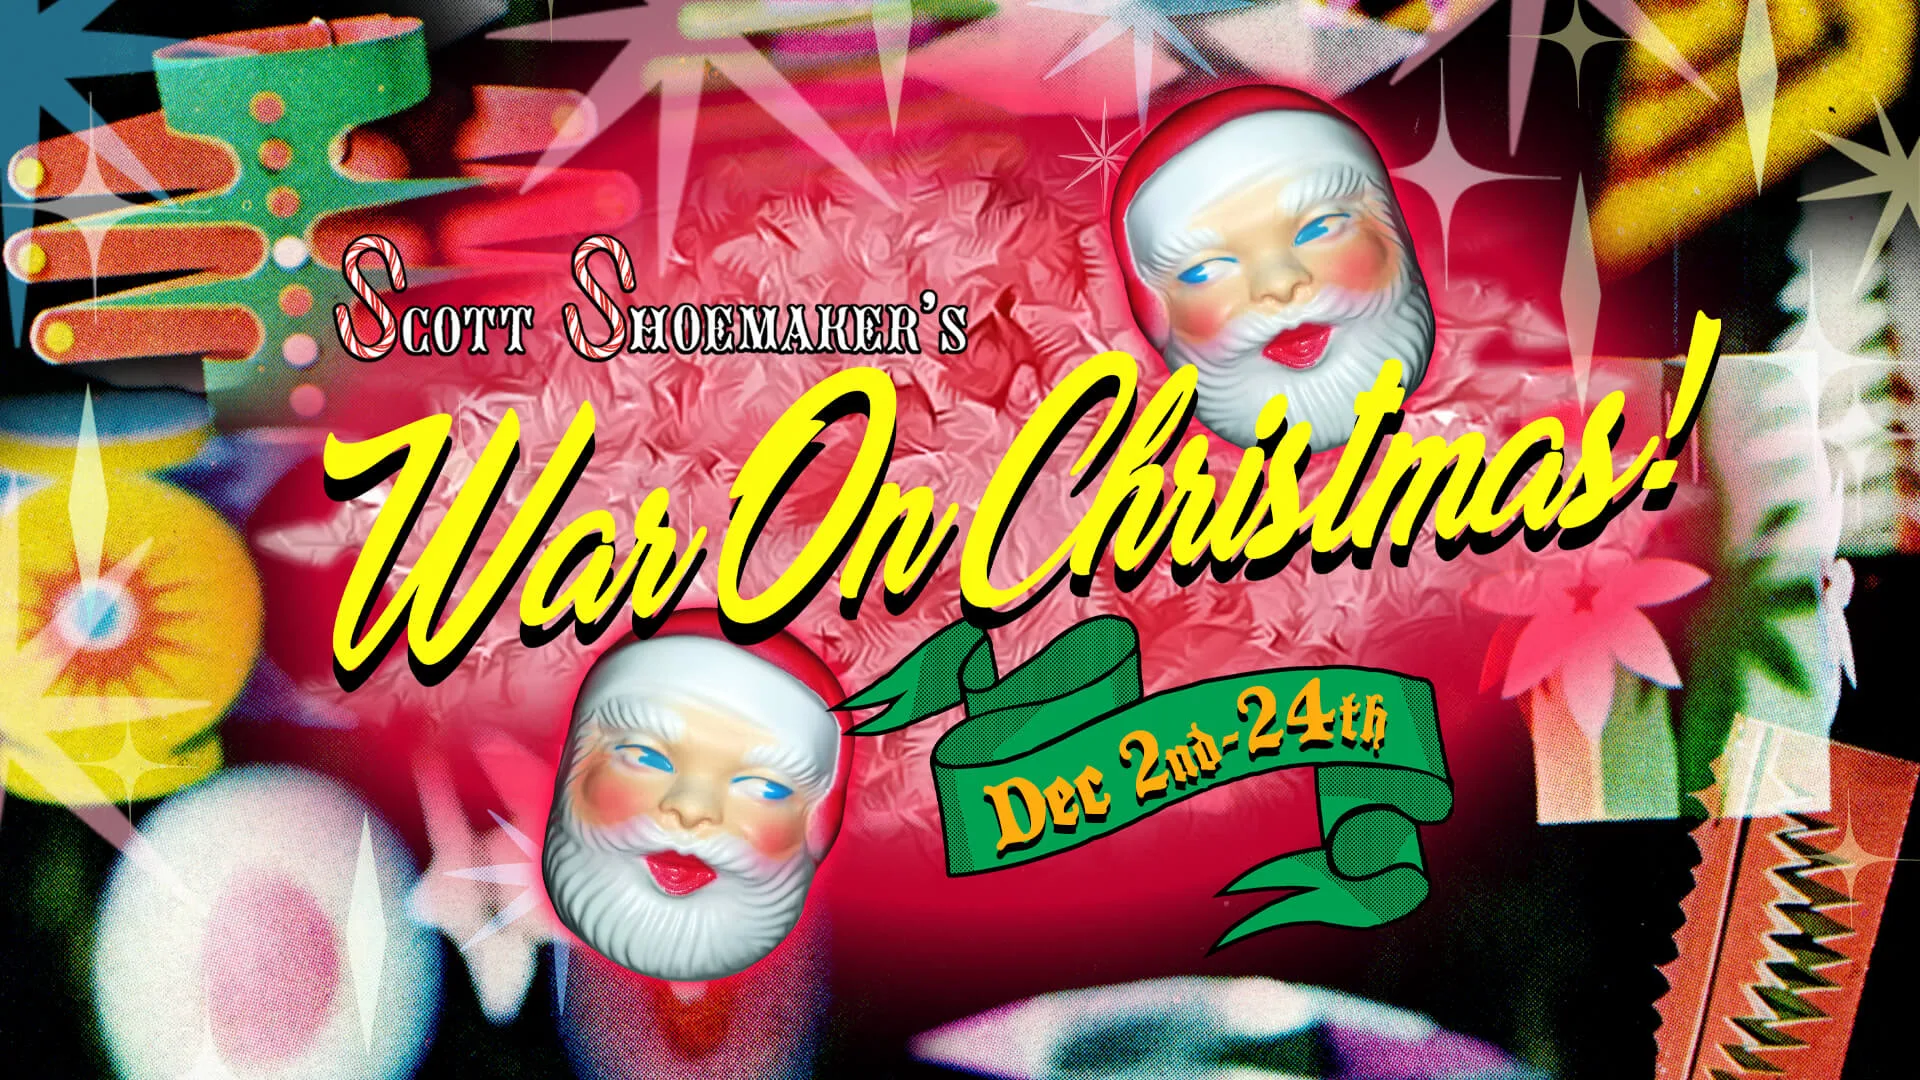 A cover image for Scott Shoemaker's War on Christmas featuring holiday ornaments and Santa Claus faces